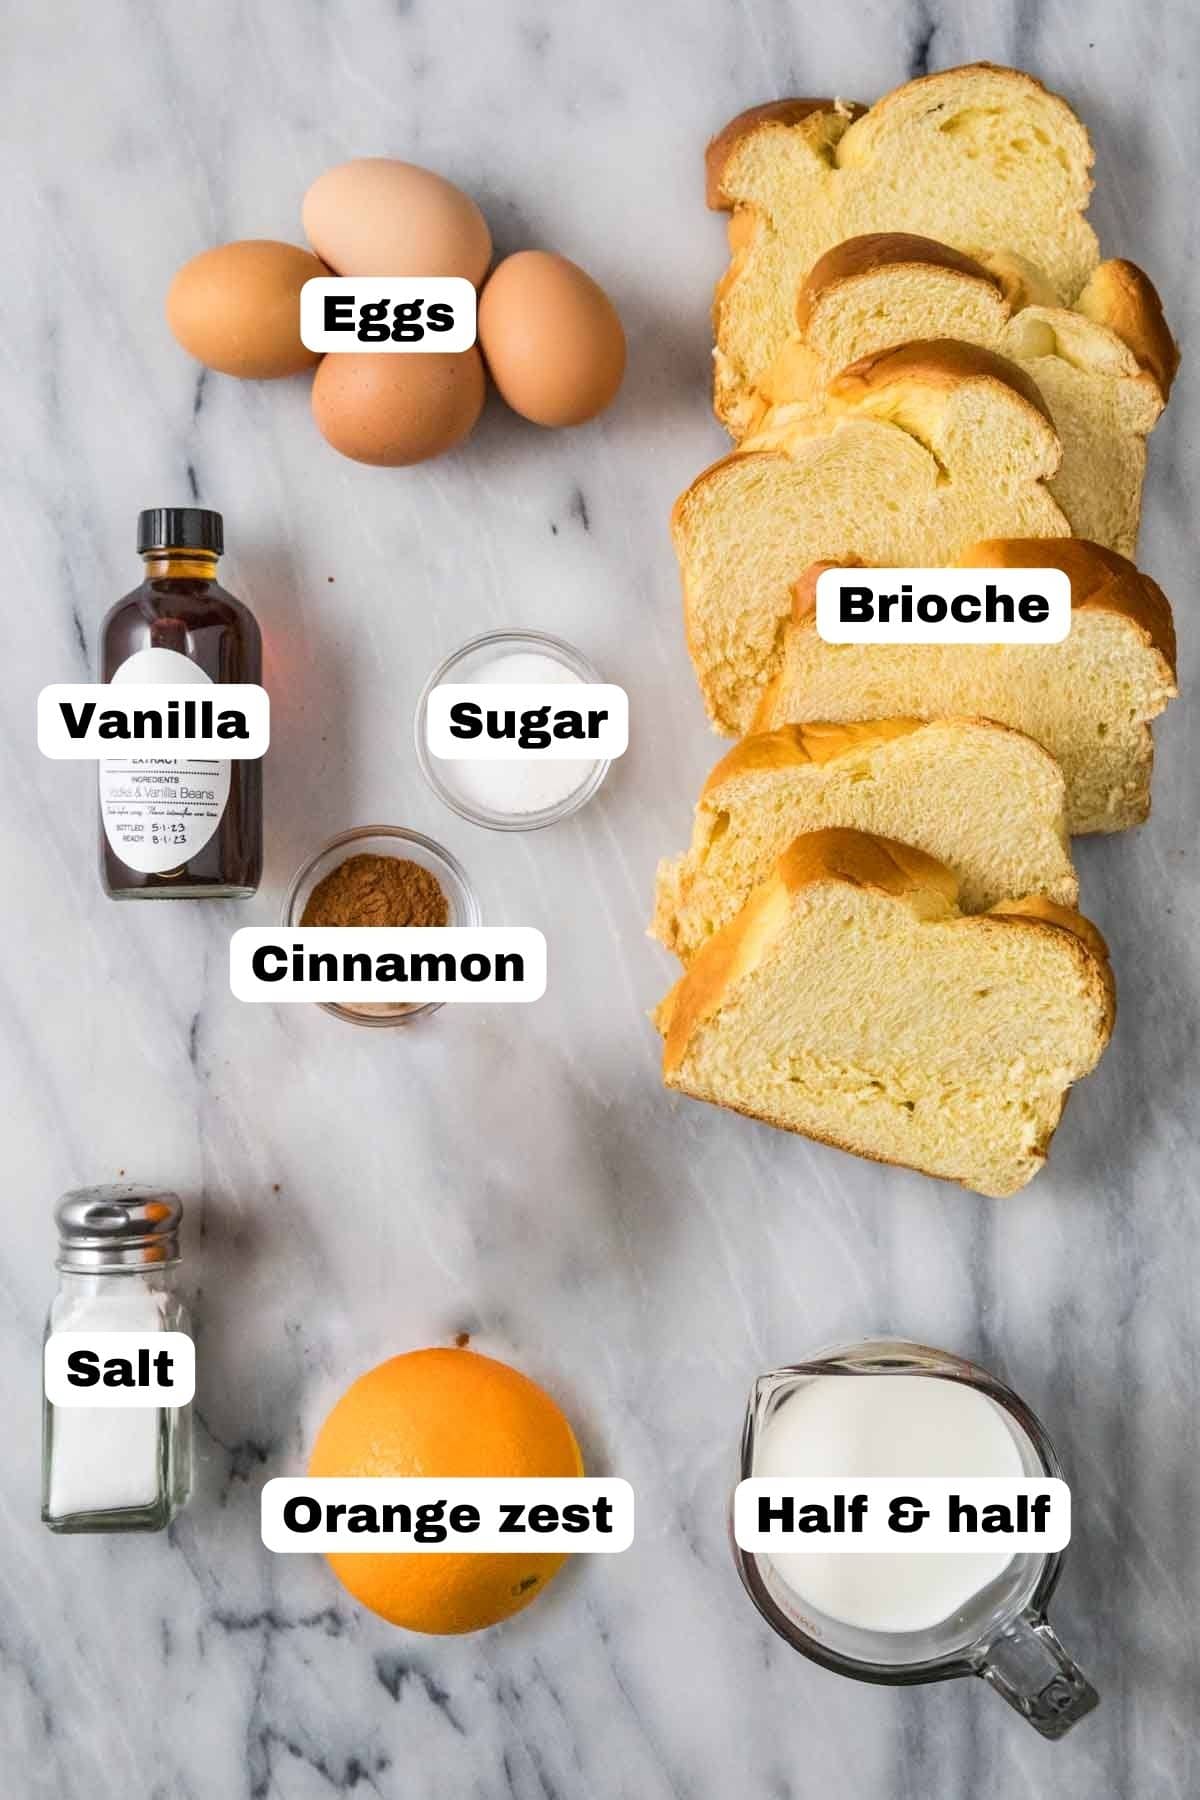 Overhead view of labelled ingredients including brioche, eggs, orange zest, and more.